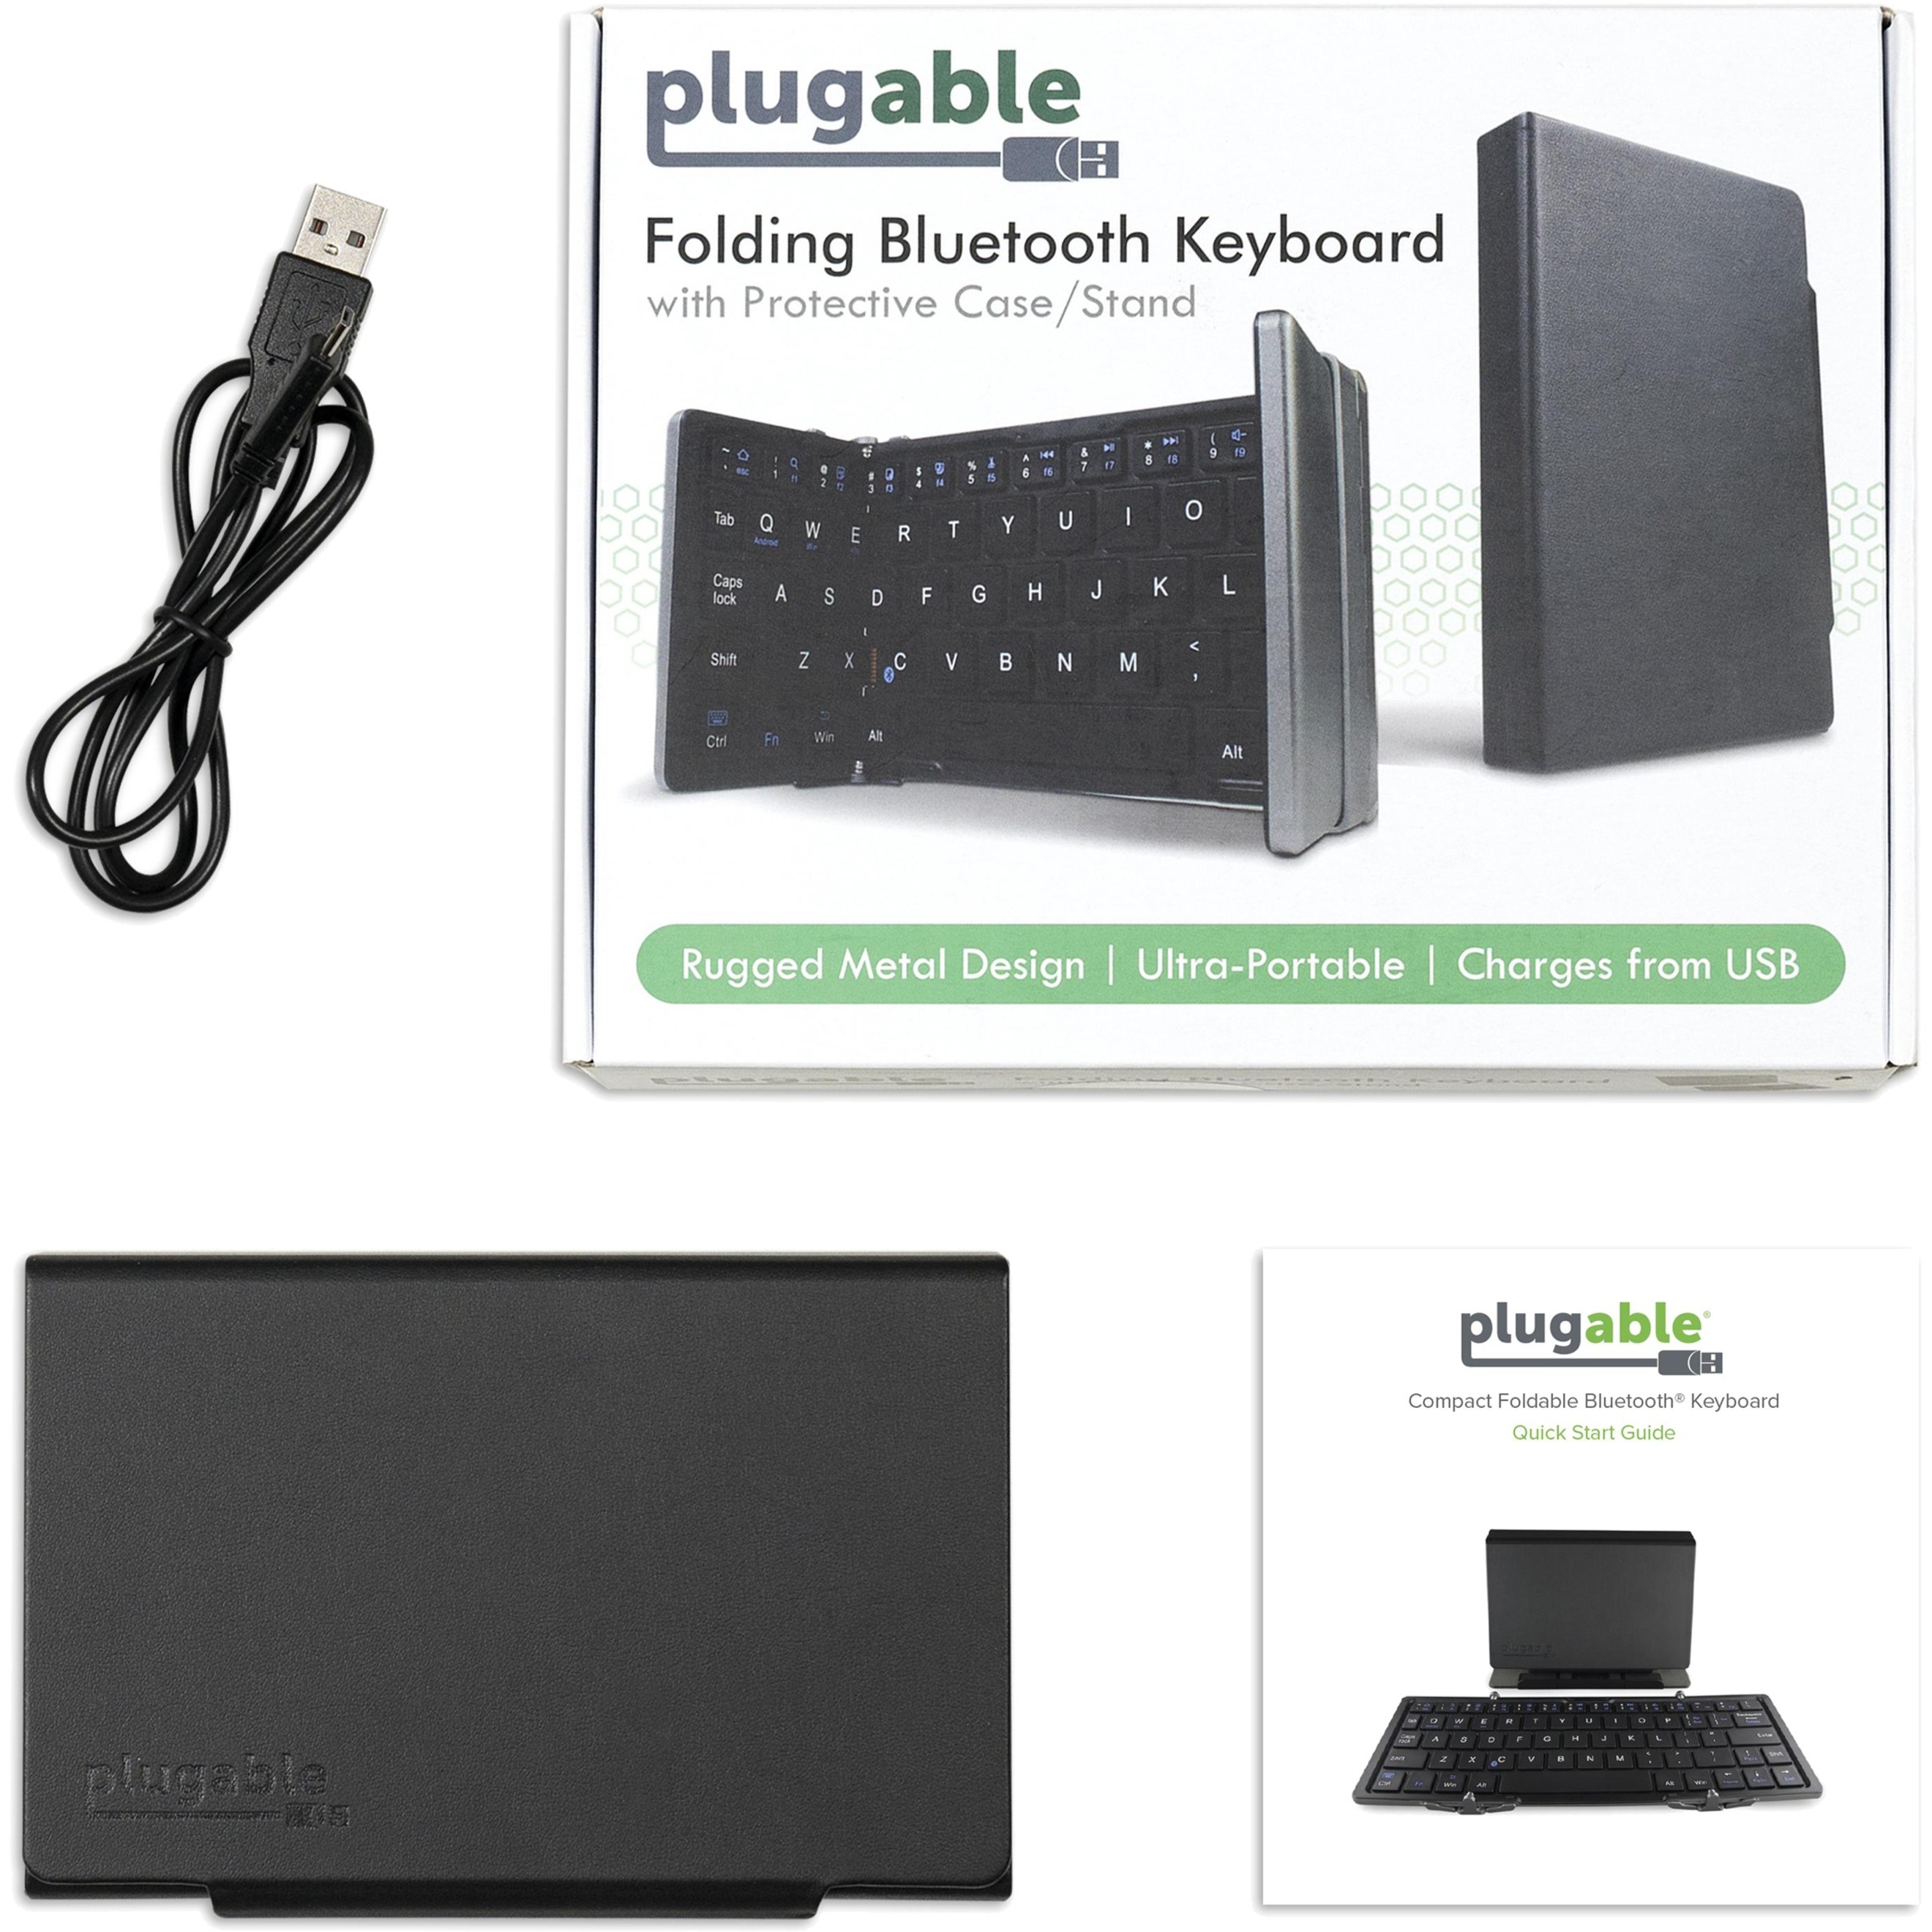 Plugable Foldable Bluetooth Keyboard Compatible with iPad, iPhones, Android, and Windows, Compact Multi-Device Keyboard, Wireless and Portable with Included Stand for iPad/iPhone (10 inches) - image 5 of 9